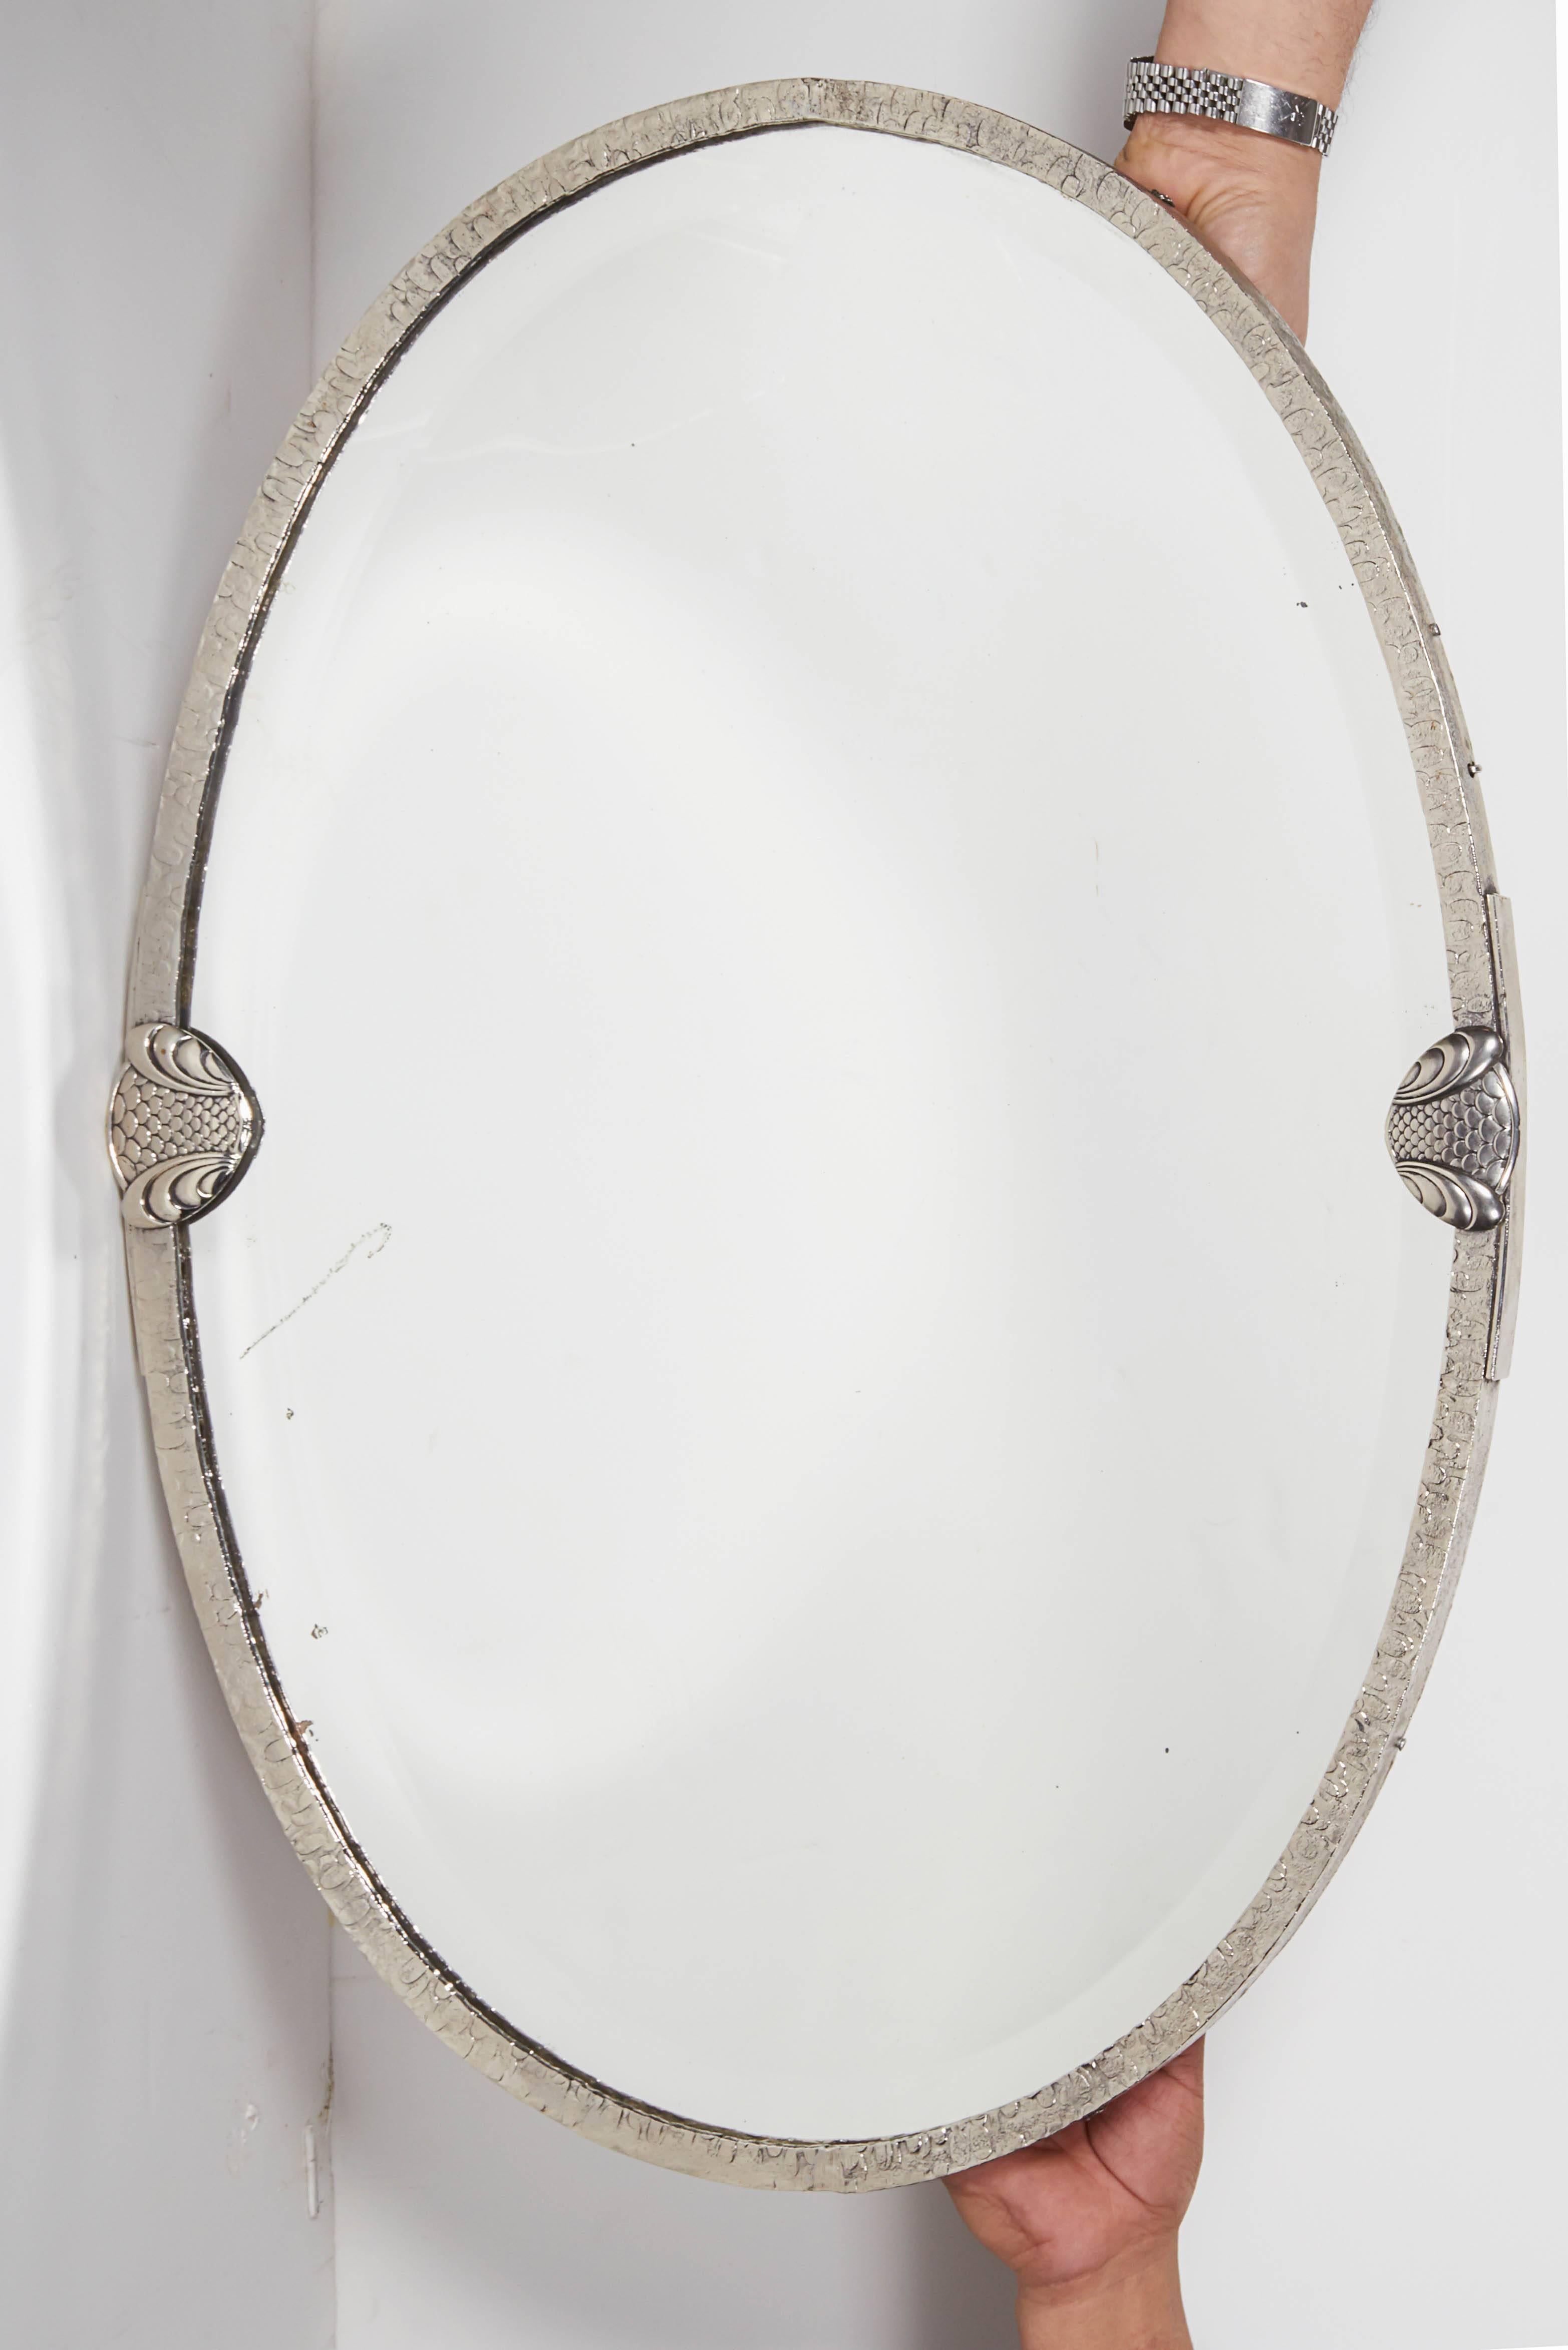 French Modernist oval mirror in hand forged nickeled iron with decorative clips flanking sides and beveled mirror inset.
The mirror can be adjusted to hang either horizontally or vertically.
Modernist, Art Deco, Italian design, mid century,over